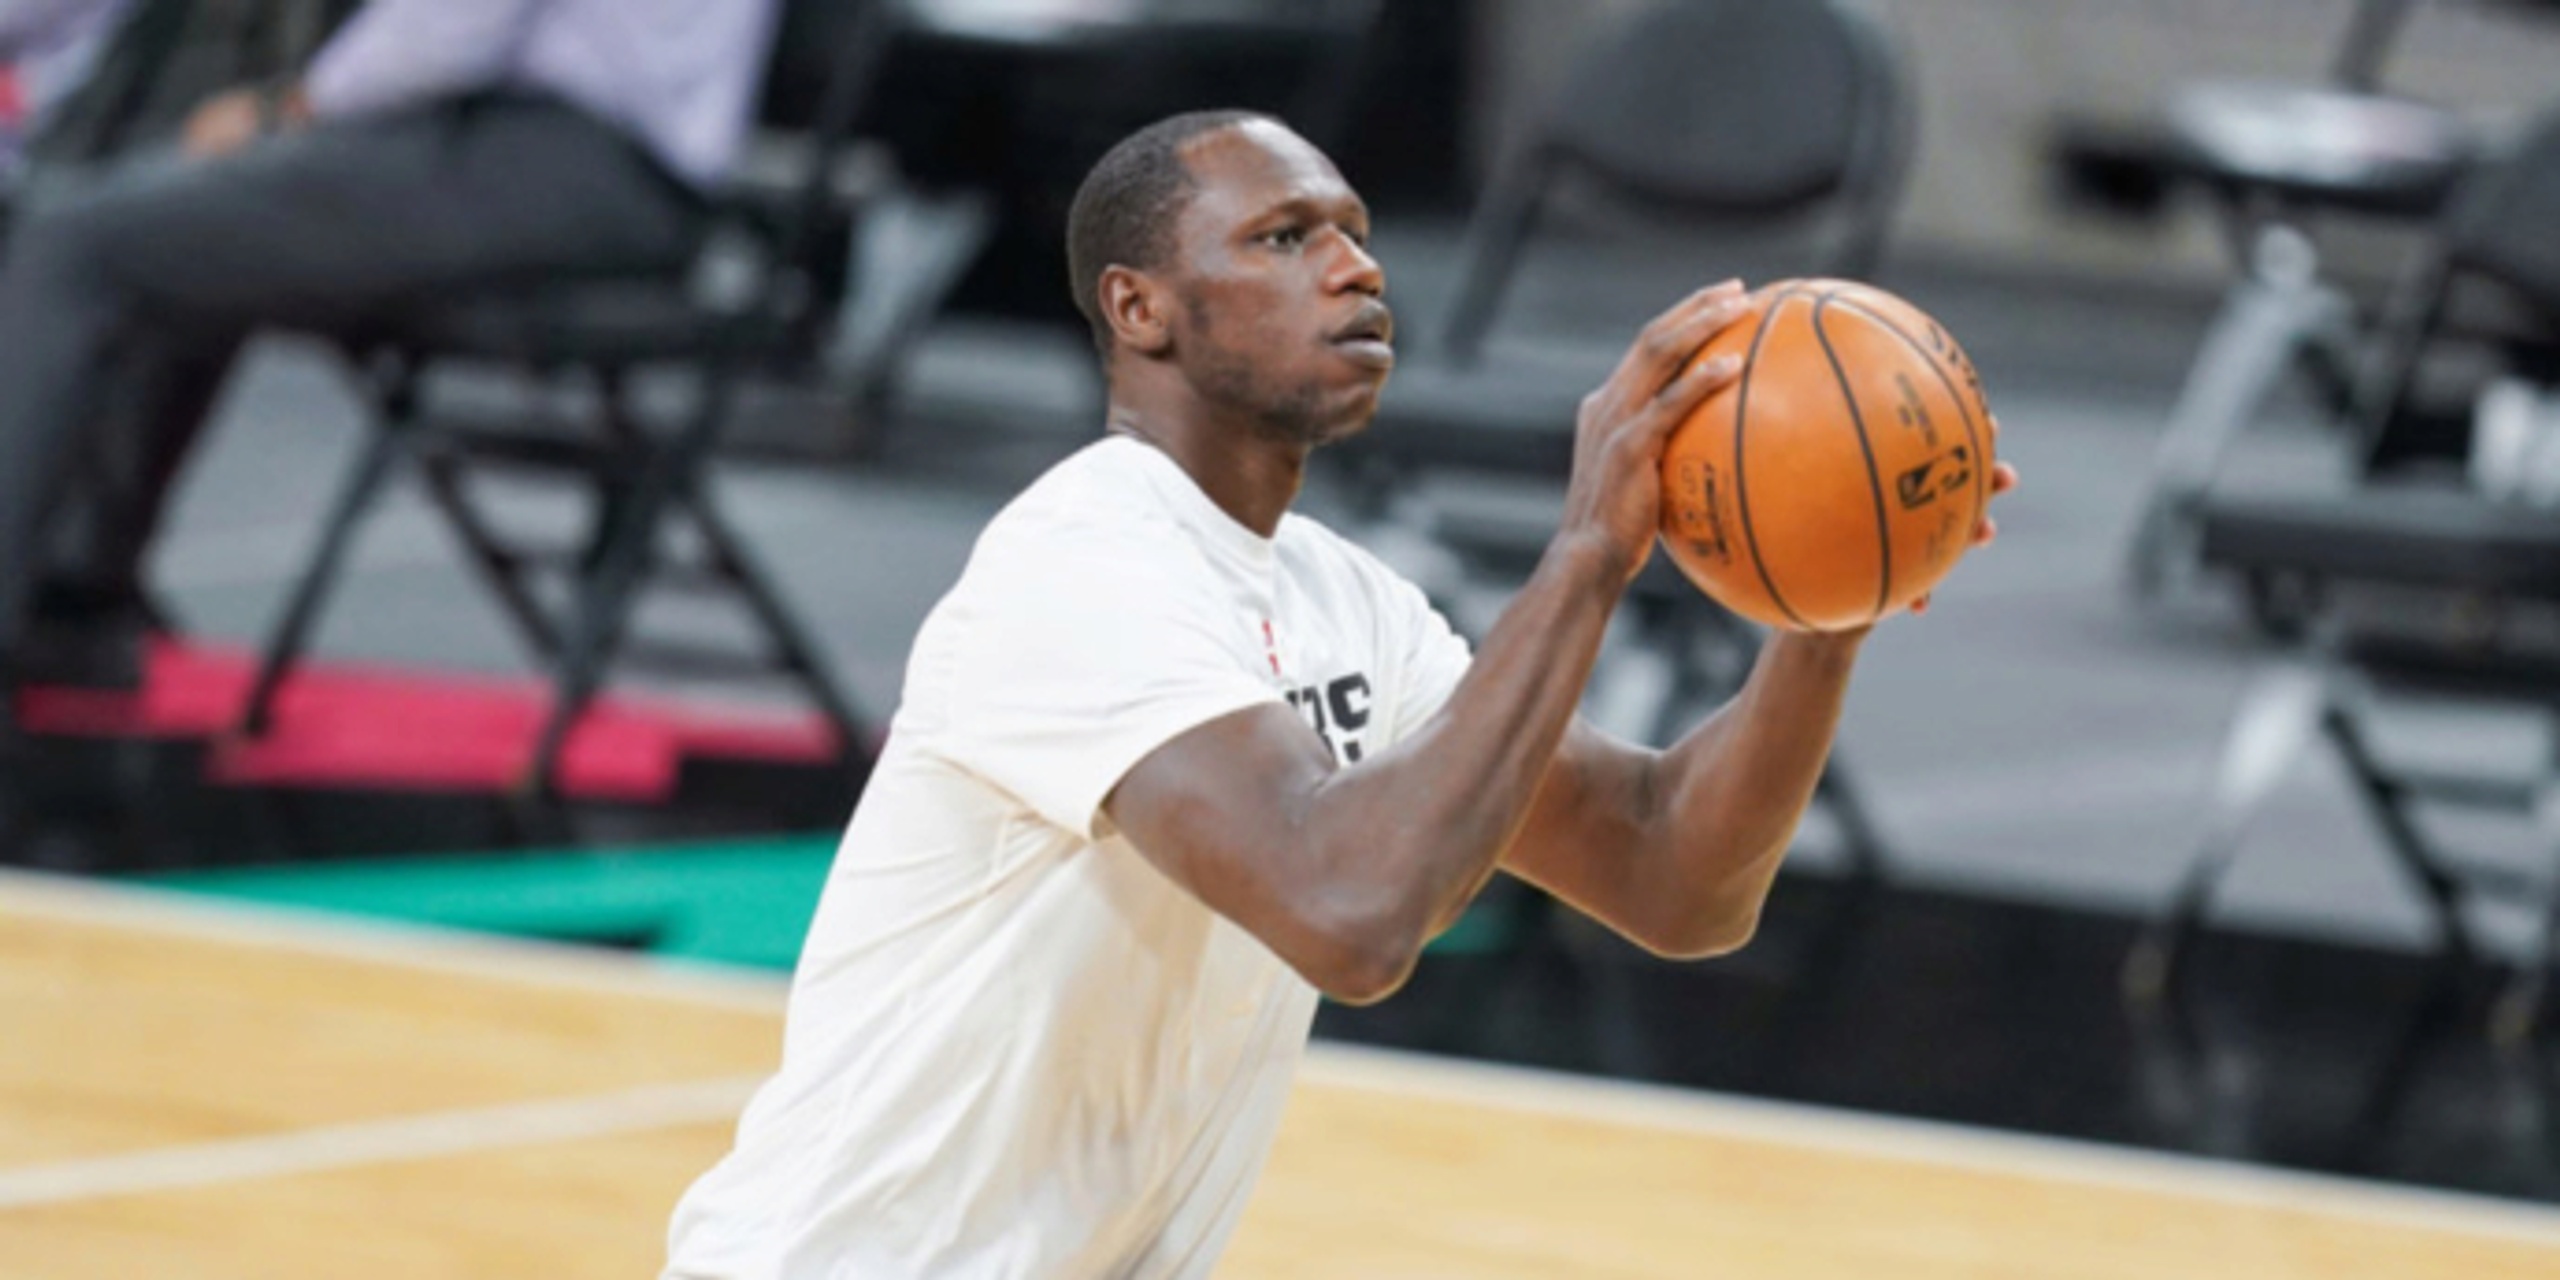 Gorgui Dieng generating free-agent interest from Suns and Spurs